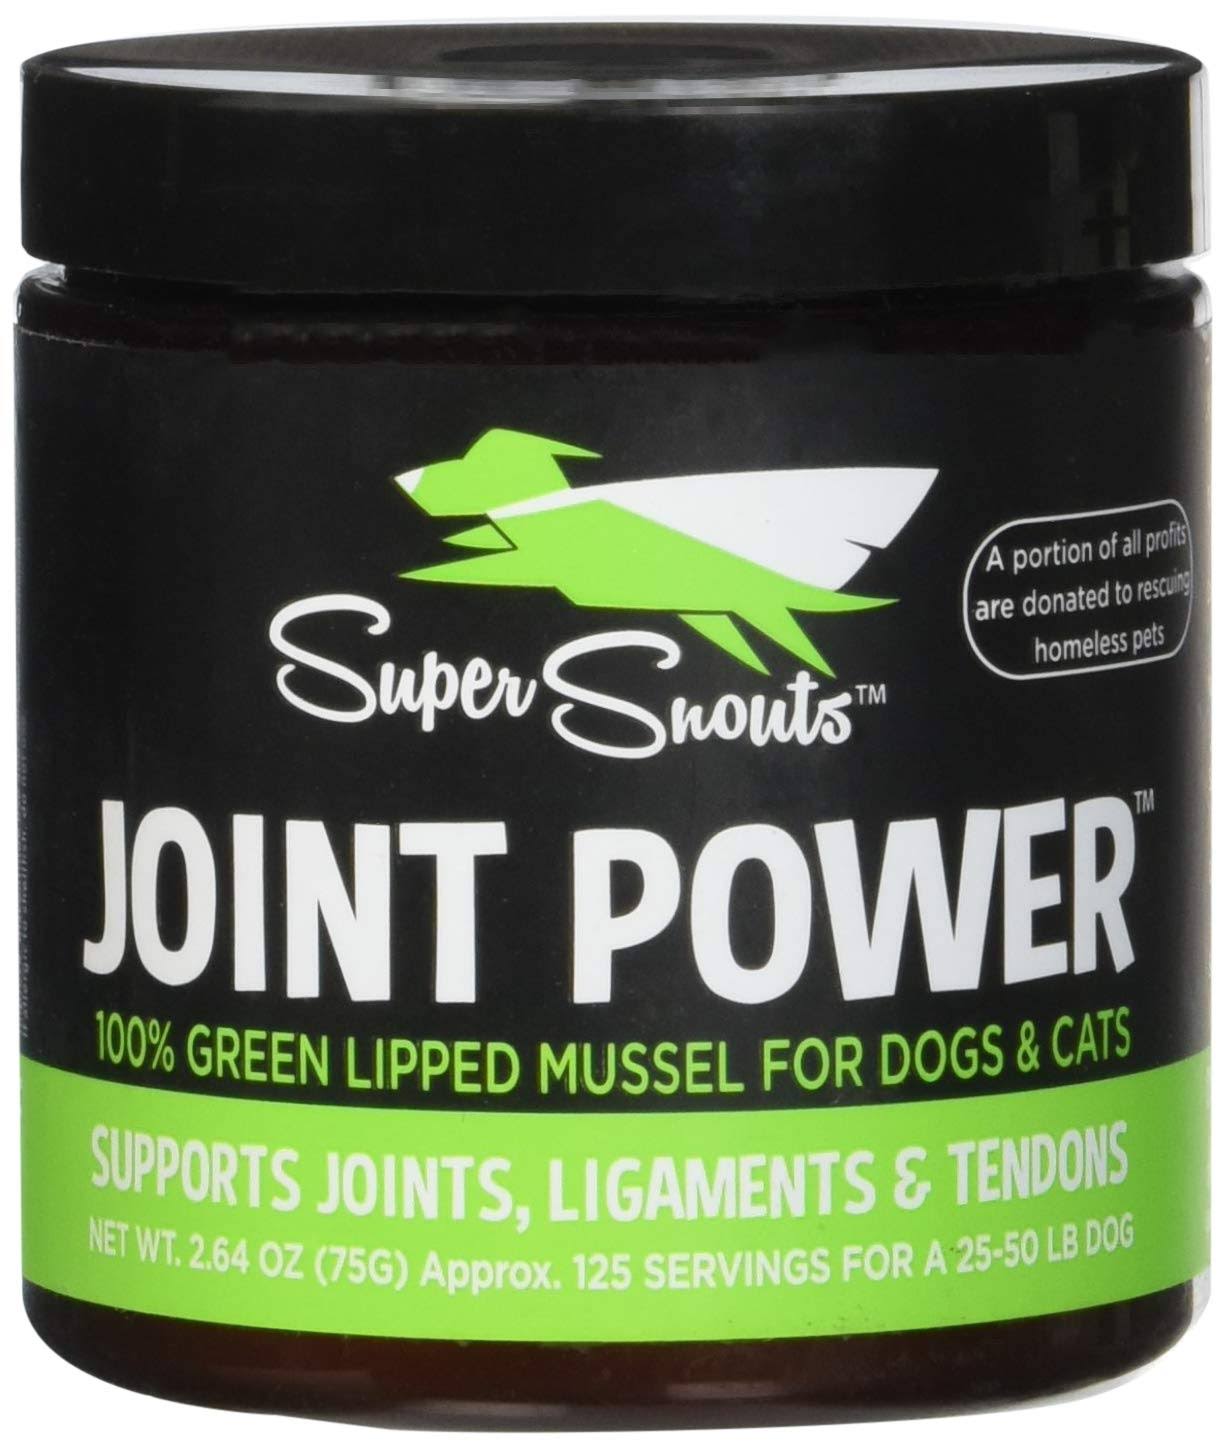 Super Snouts Joint Power Green Lipped Mussel Powder for Dogs and Cats - 2.64oz